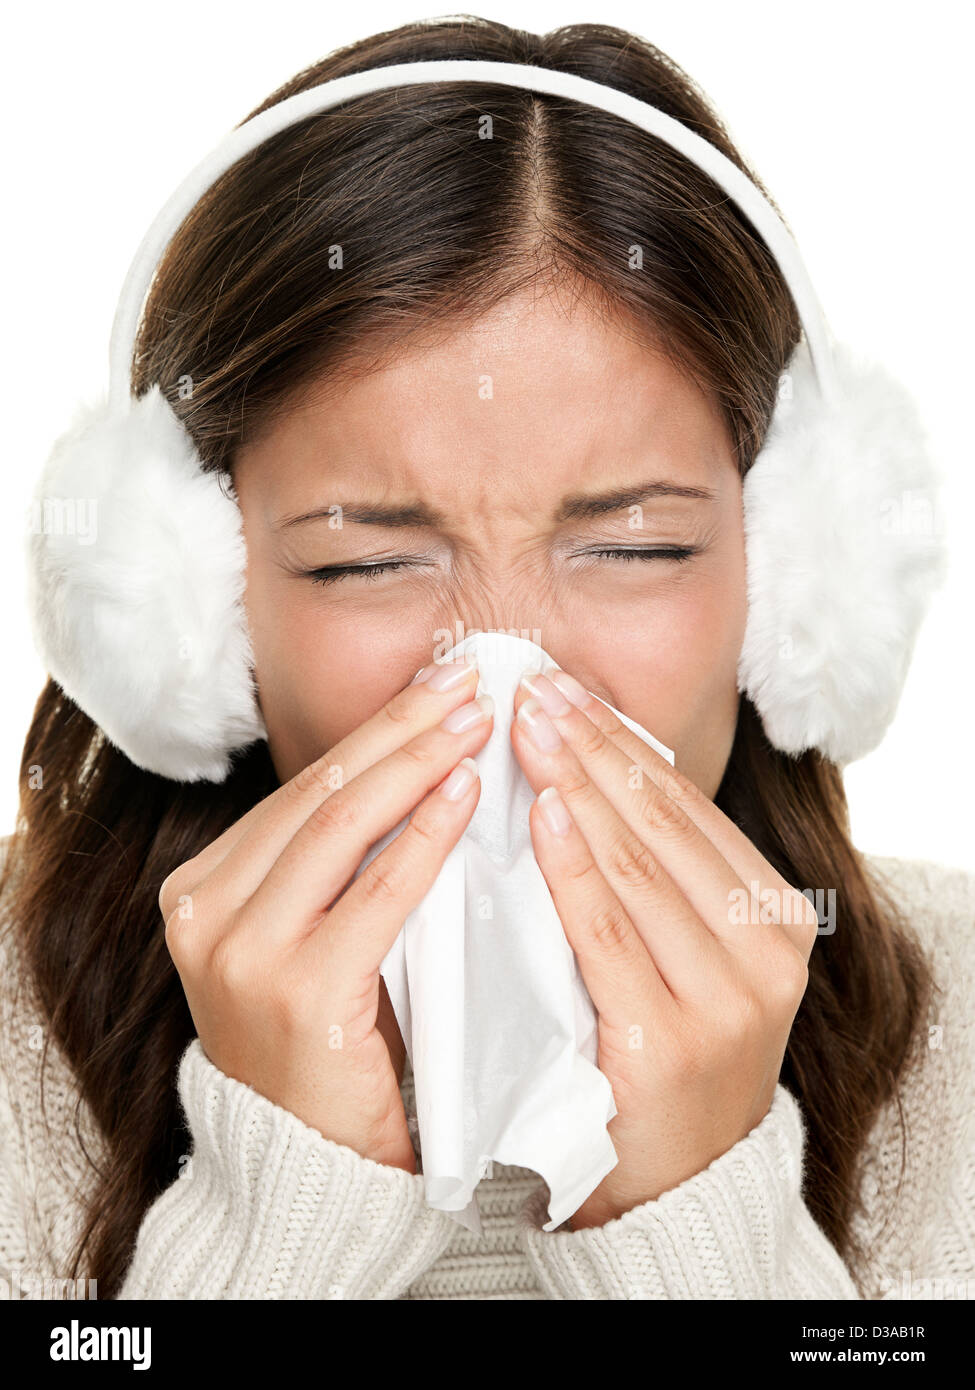 Sneezing woman sick blowing nose. Young woman being cold wearing earmuffs and sweater. Asian Caucasian female model Stock Photo